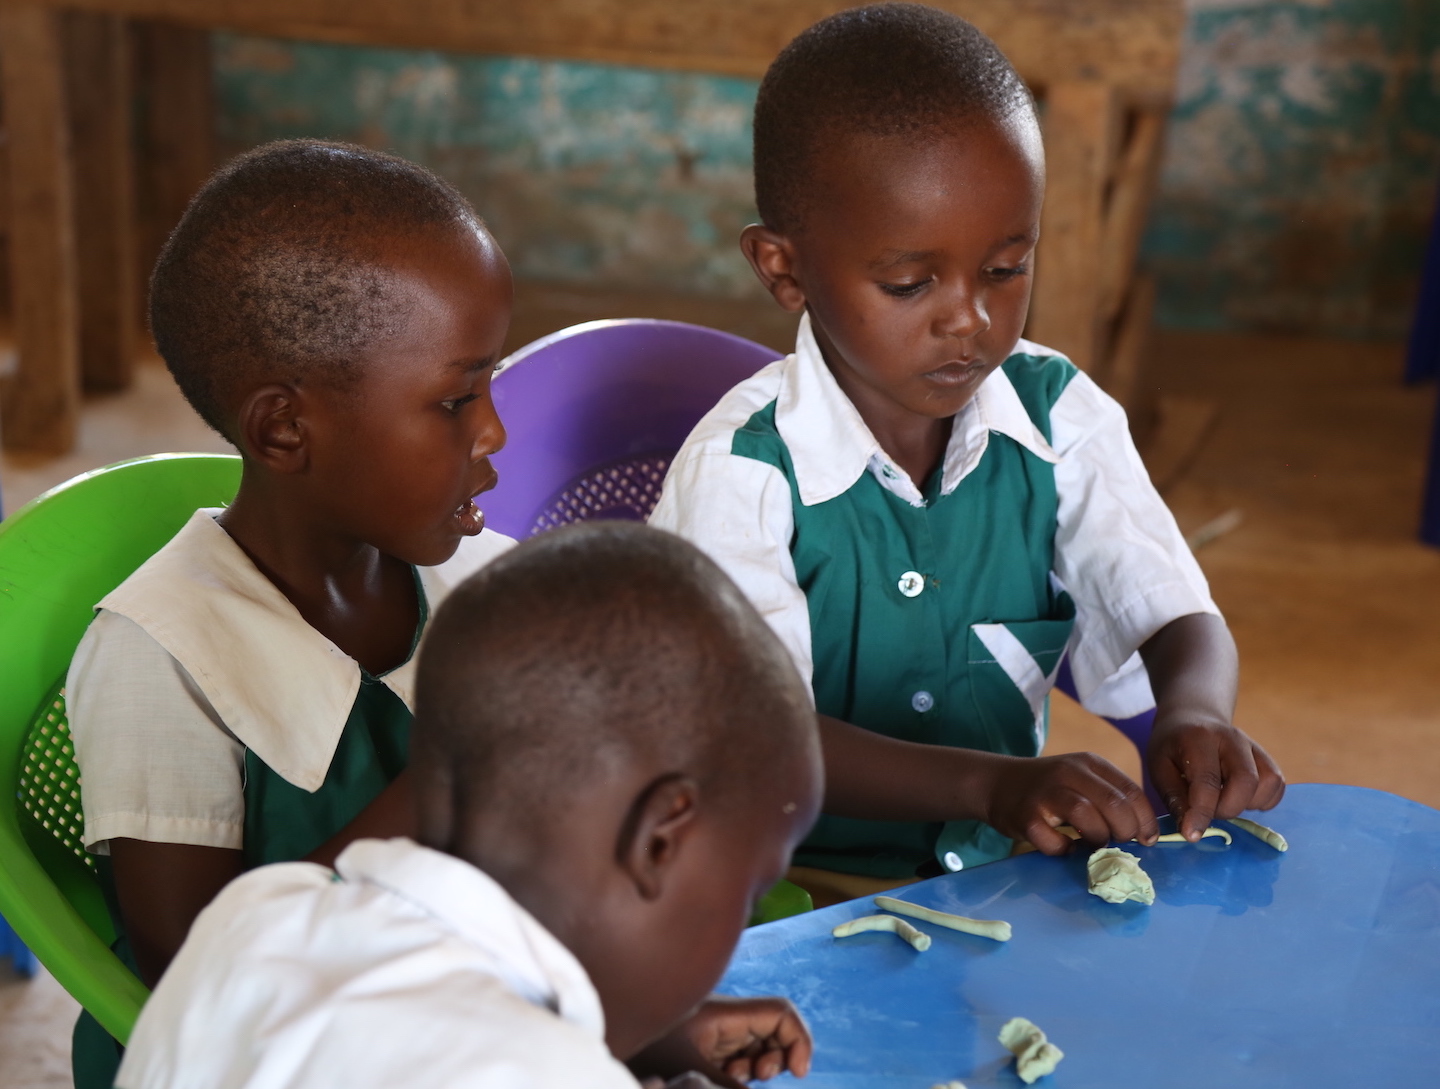 Children enjoy playing with modelling clay that comes with the School-in-a- Box Kit. © World Vision Photo/Sarah Ooko